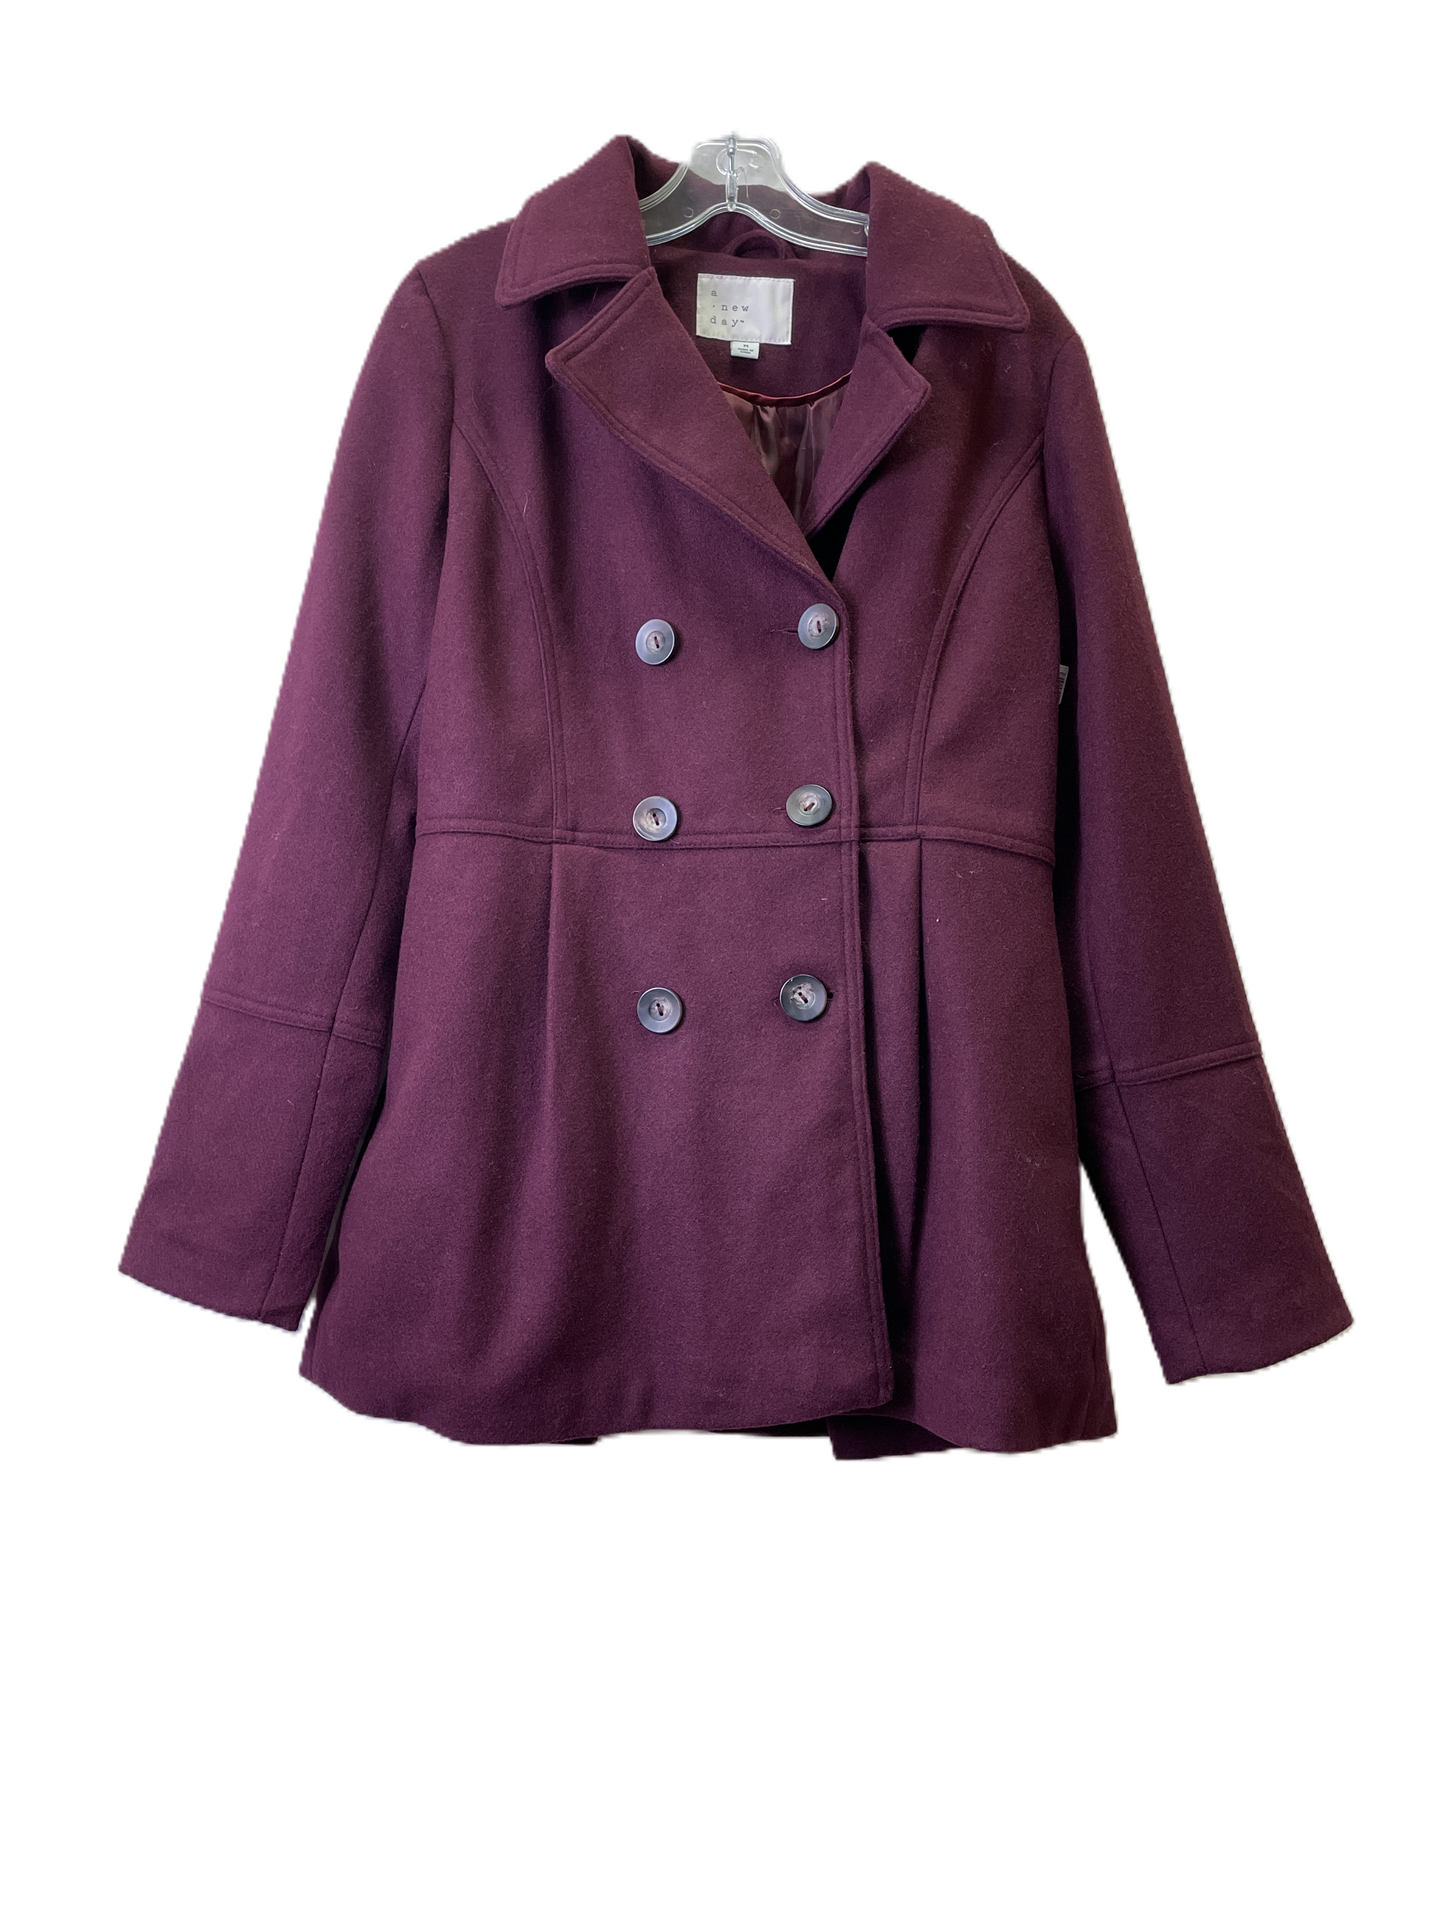 Purple Coat Peacoat By A New Day, Size: M